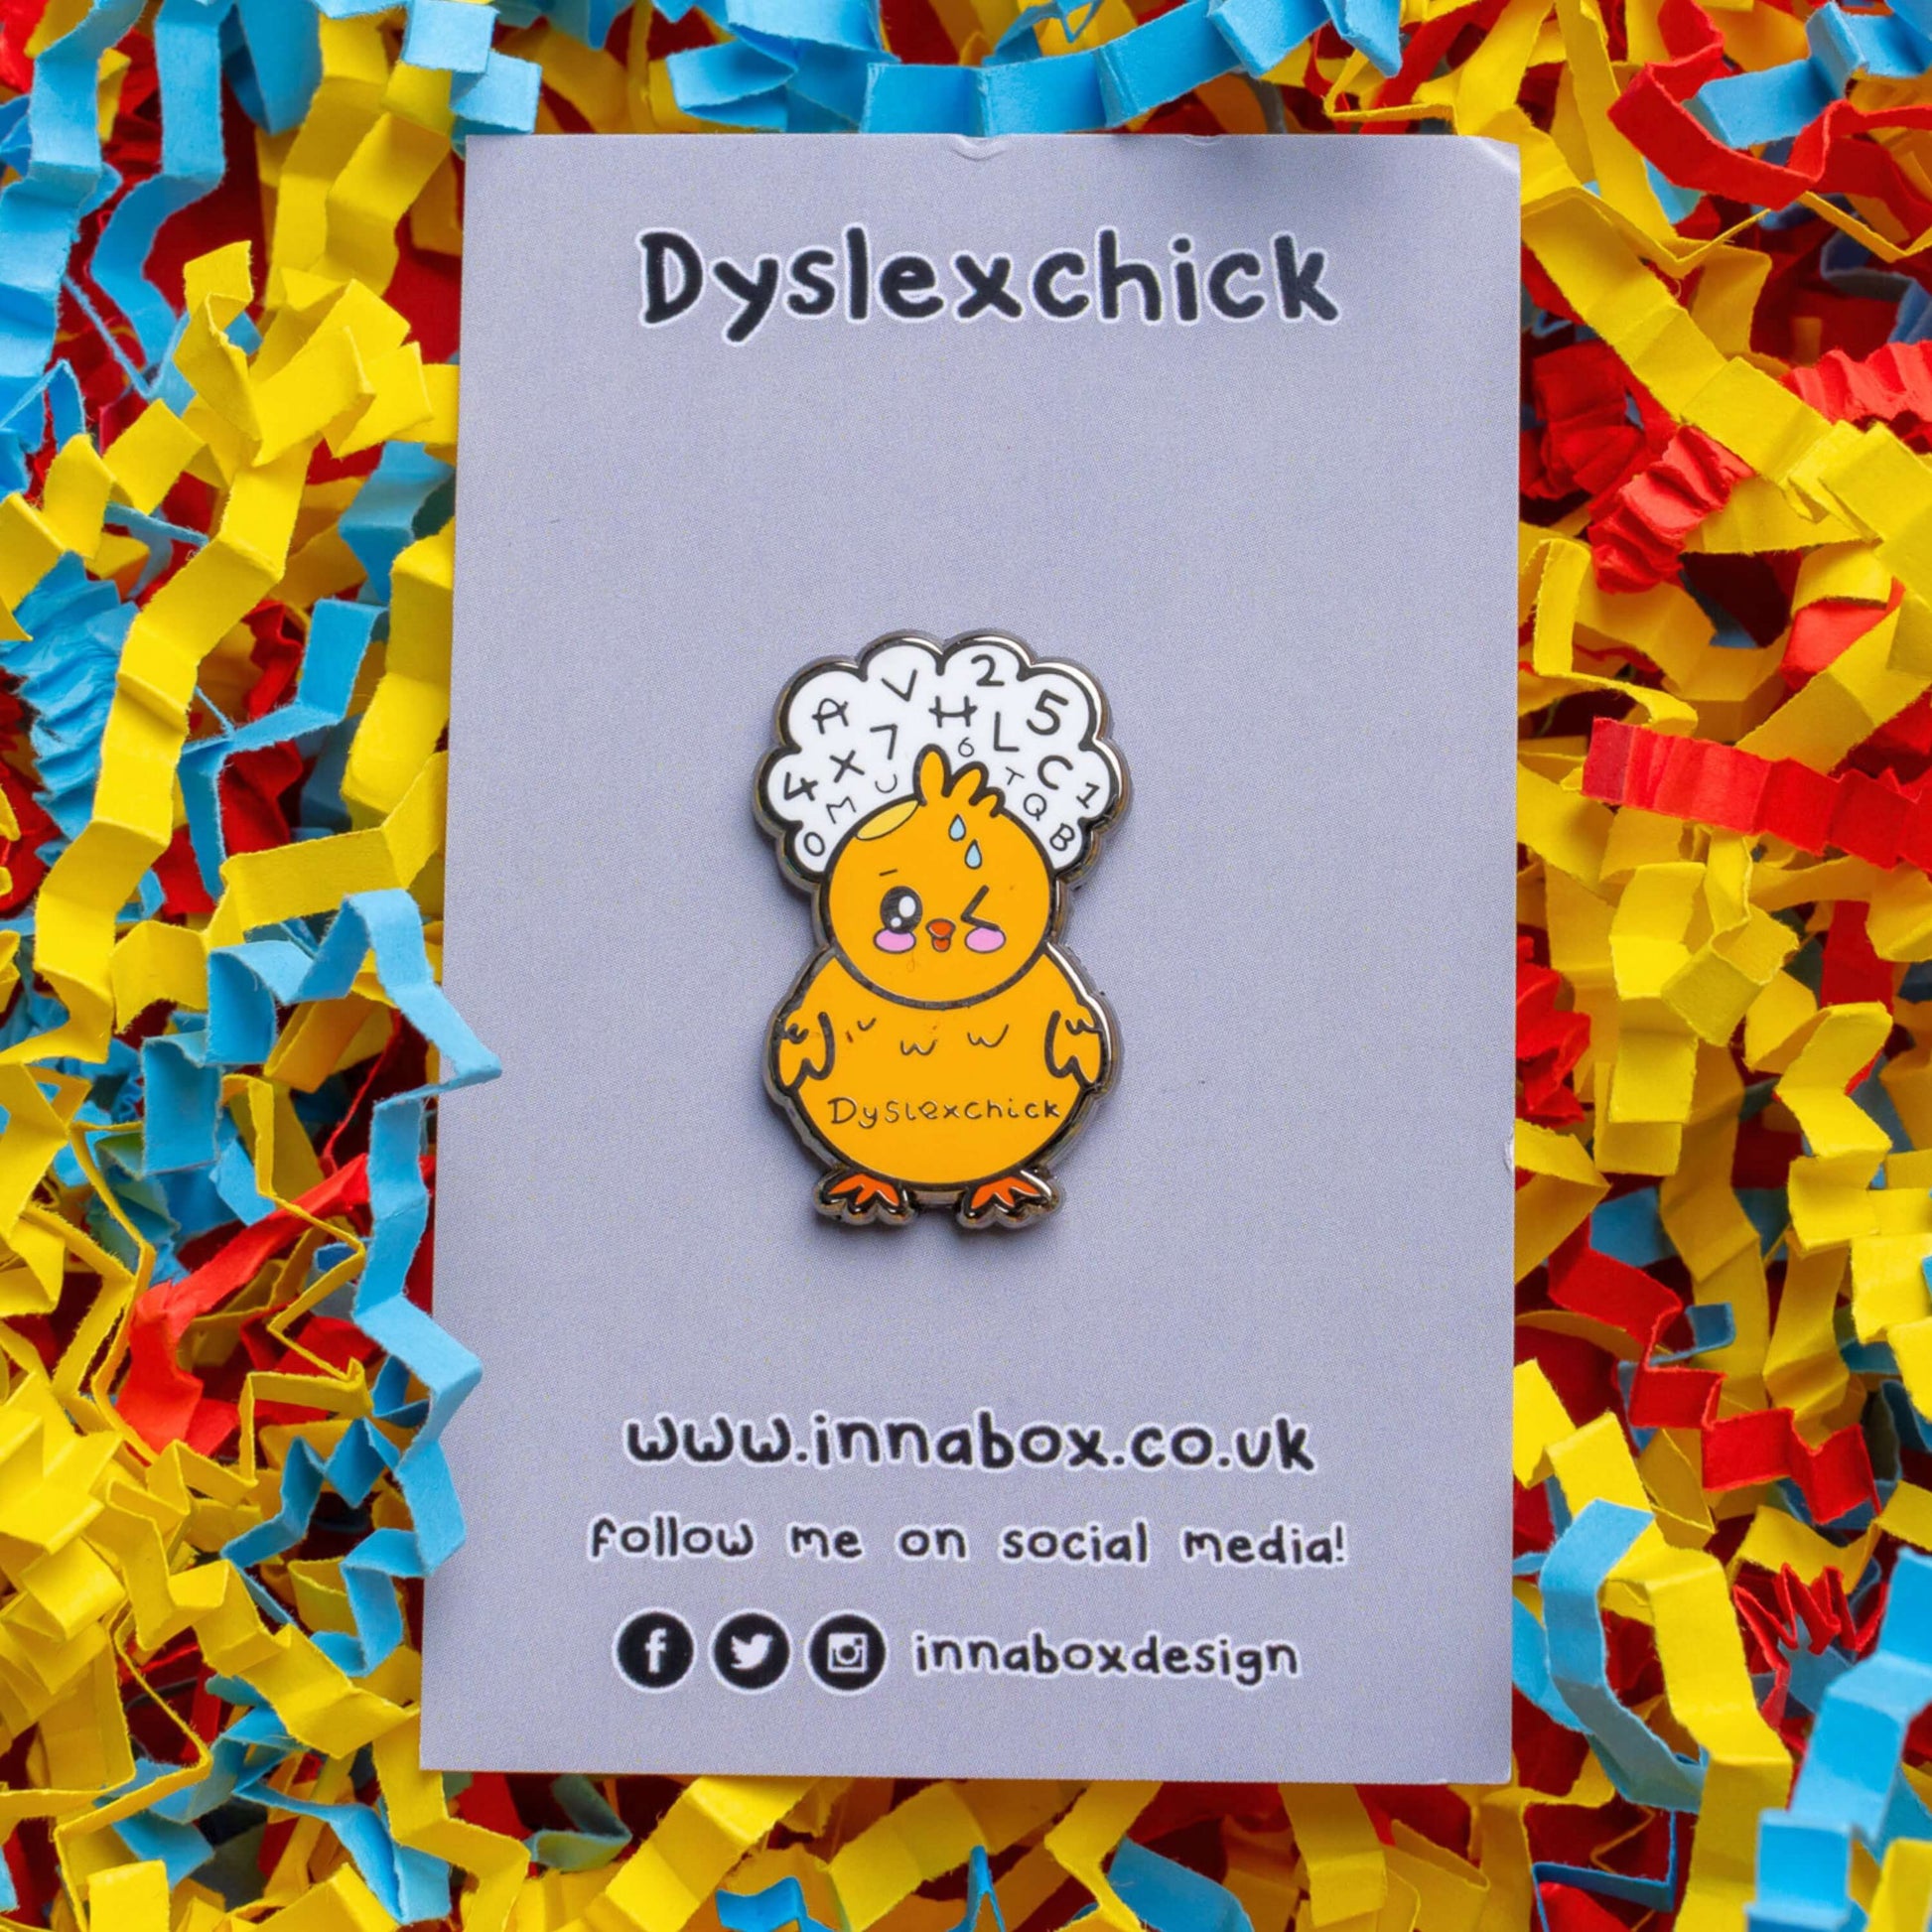 The Dyslexchick Enamel Pin - Dyslexia on grey backing card laid on a red, yellow and blue card confetti background. A yellow confused chick shaped pin badge with a thought bubble above its head full of letters and numbers with 'dyslexchick' written across its middle. The hand drawn design is raising awareness for dyslexia.